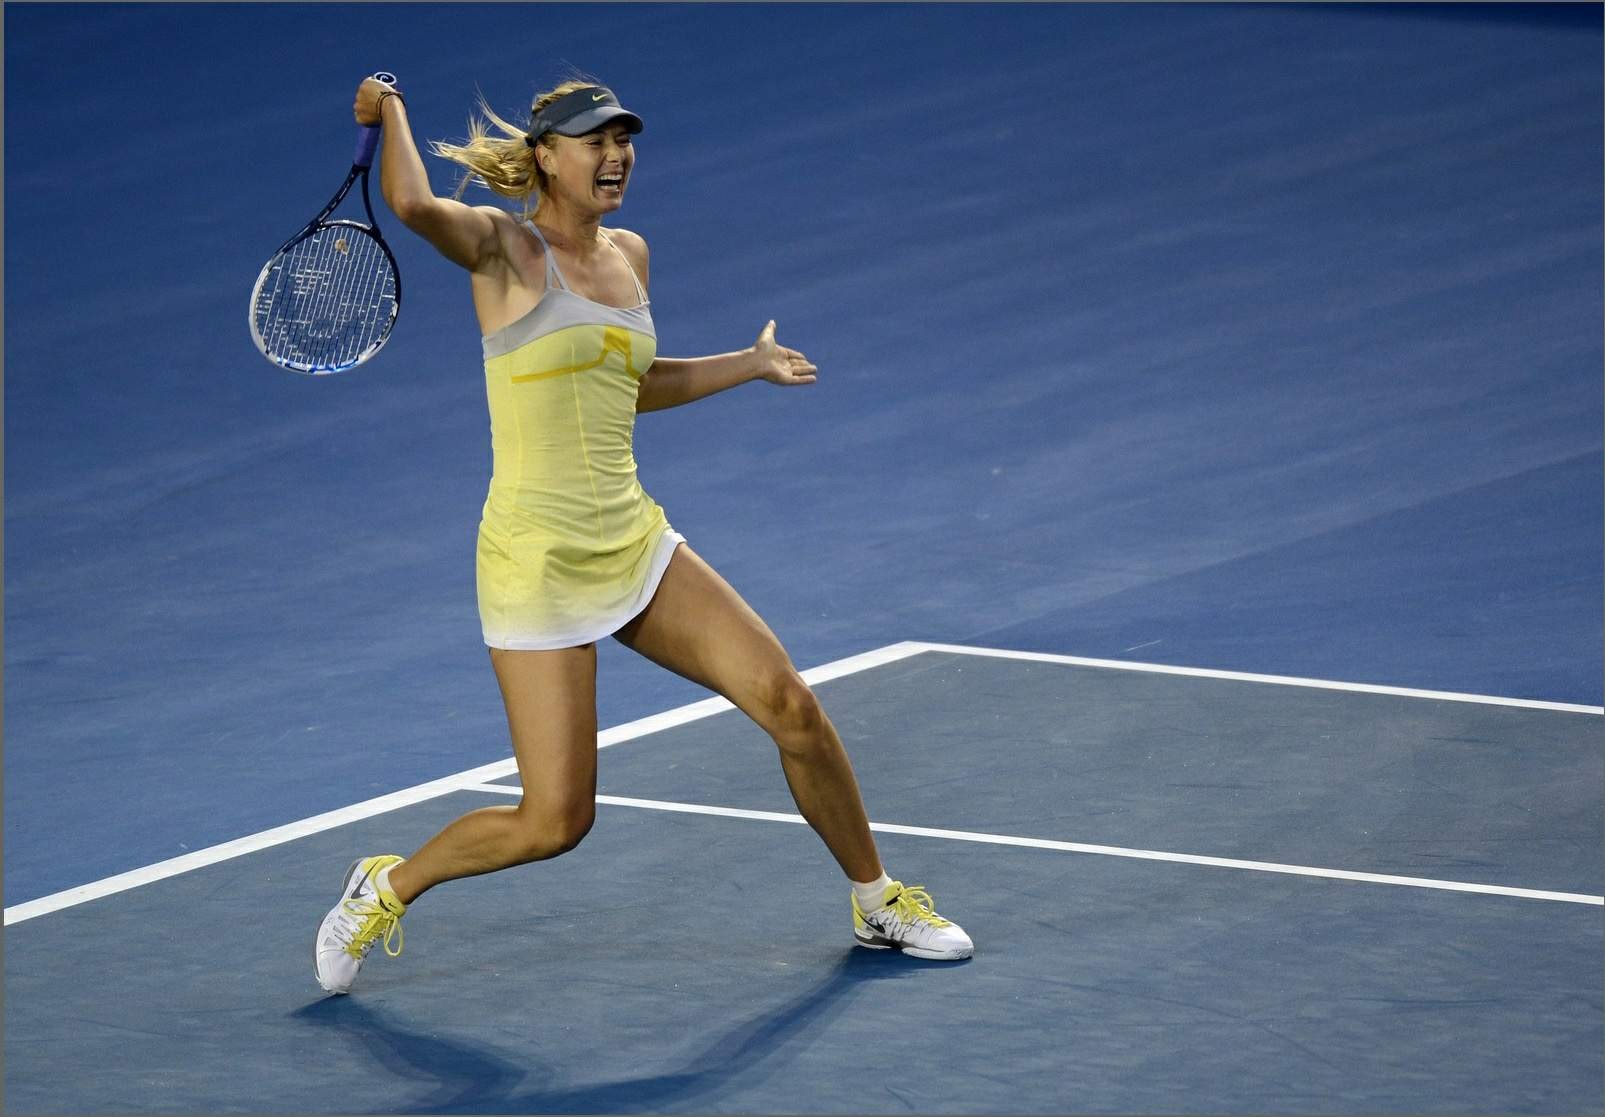 Maria Sharapova flashing her panties at the Australian Open in Melbourne #75243487